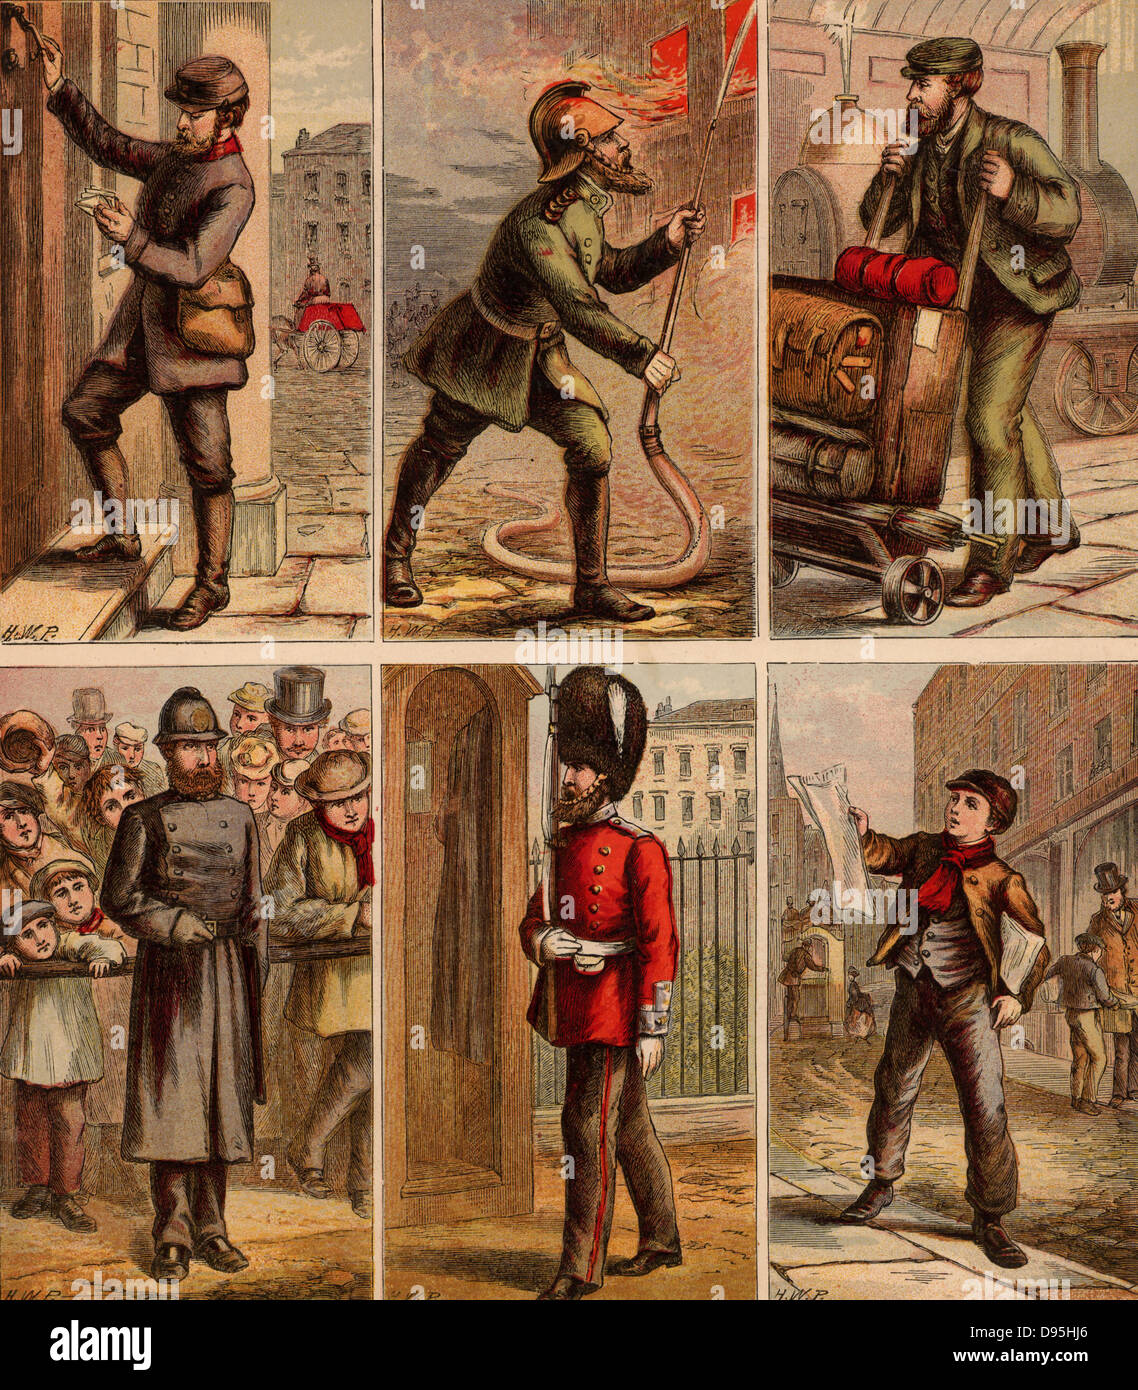 London street scenes. Postman delivering letters: Fireman fighting a fire: Railway Porter with trolley of luggage: Policeman on crowd duty: Guardsman of sentry duty: Newsboy selling papers.. Illustrations by Horace William Petherick (1839-1919) for a children's book published London c1875. Stock Photo